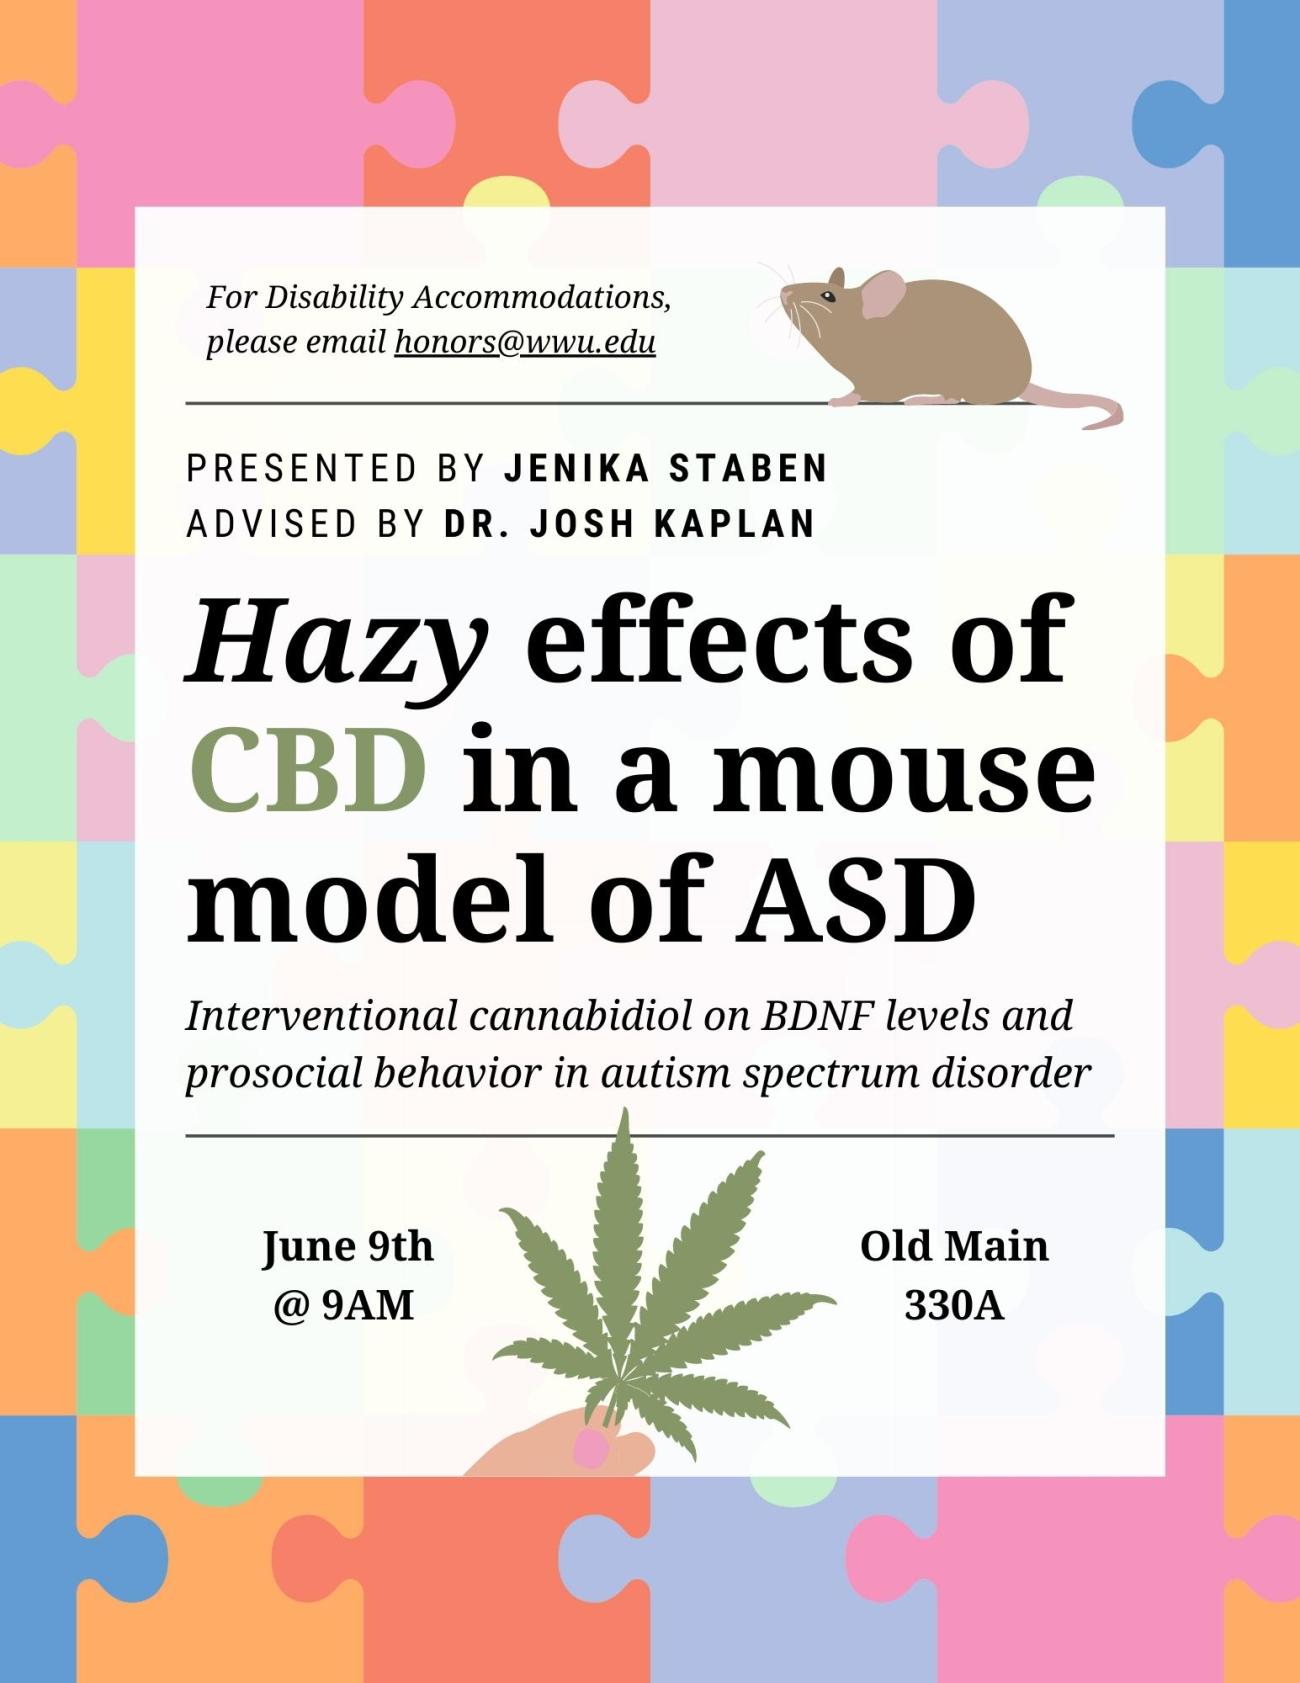 Colorful background of a jigsaw puzzle overlayed by a white box. “For Disability Accommodations, please email honors@wwu.edu” next to a graphic of a brown mouse. title reads “Hazy effects of CBD in a mouse model of ASD.” Text above title reads “Presented by Jenika Staben, Advised by Dr. Josh Kaplan.” Subtitle below reads “Interventional cannabidiol on BDNF levels and prosocial behavior in a mouse model of autism spectrum disorder.” Text at the bottom of the box reads “June 9th at 9AM” and “Old Main 330A” 